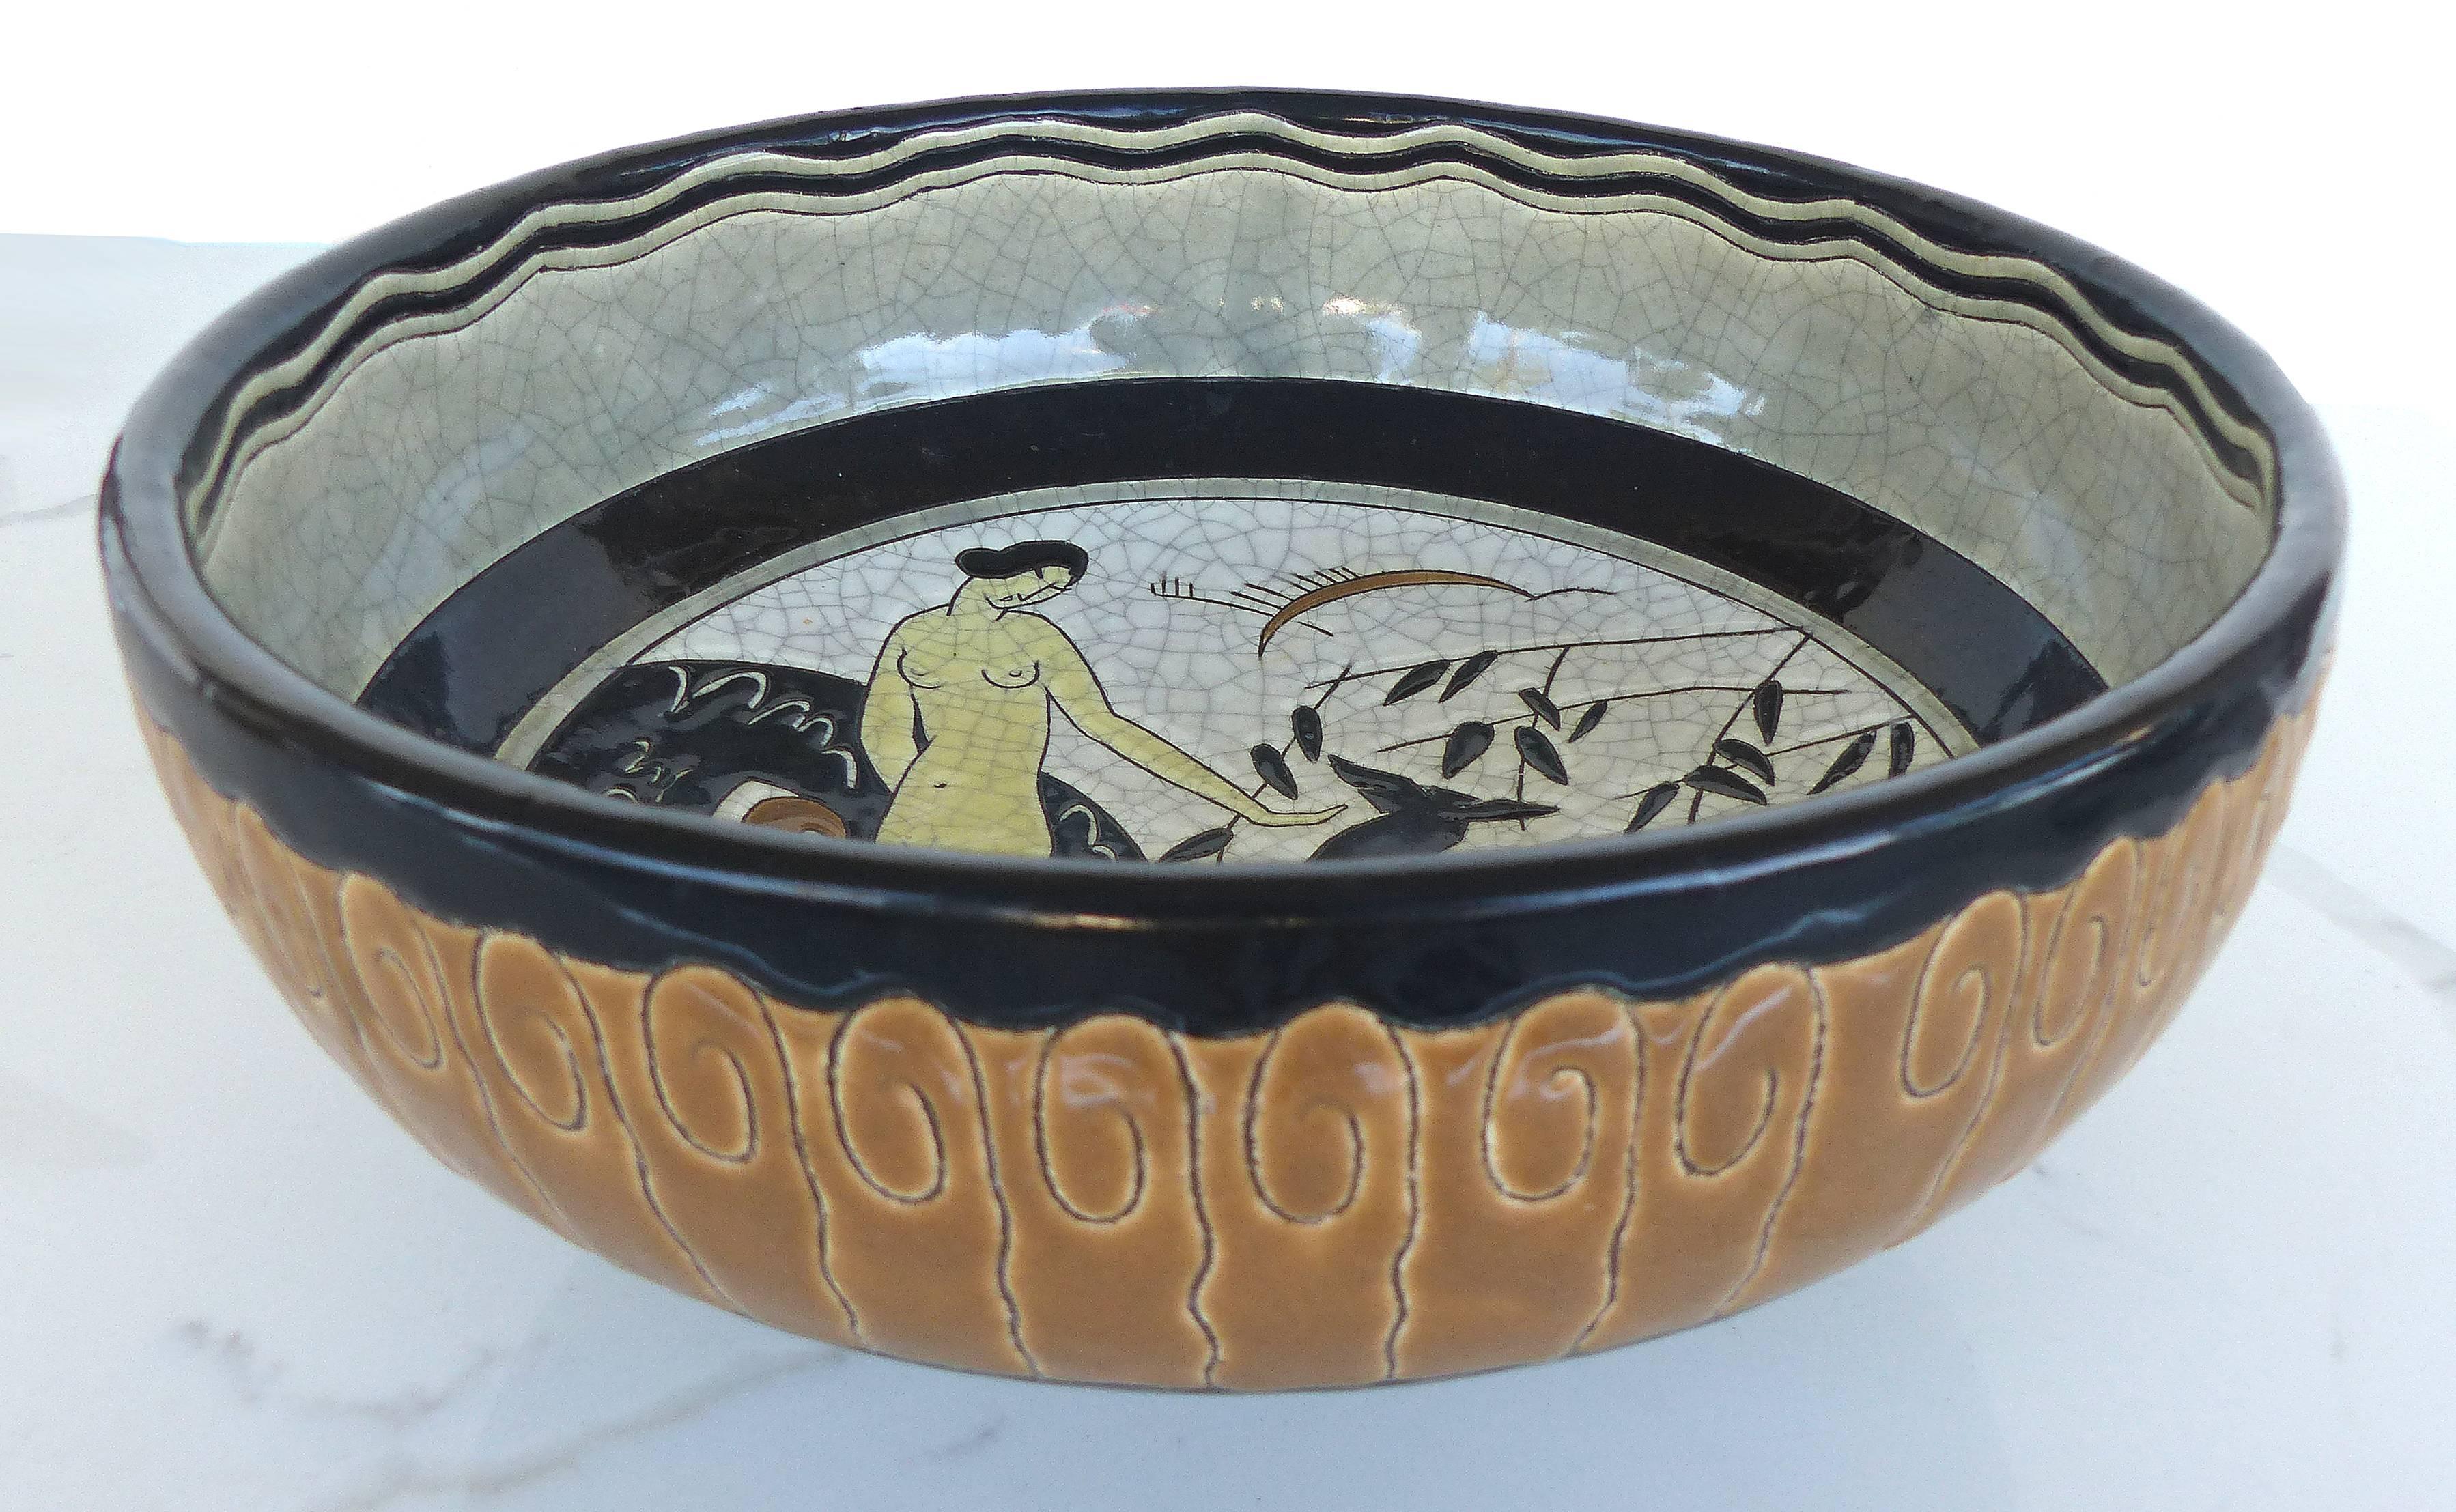 Longwy Primavera Art Deco footed bowl

Offered for sale is a French Art Deco enamel glazed ceramic footed bowl by Longwy (France) from the Primavera period while the factory was under the direction of Rene Buthaud. This lovely bowl depicts a pair